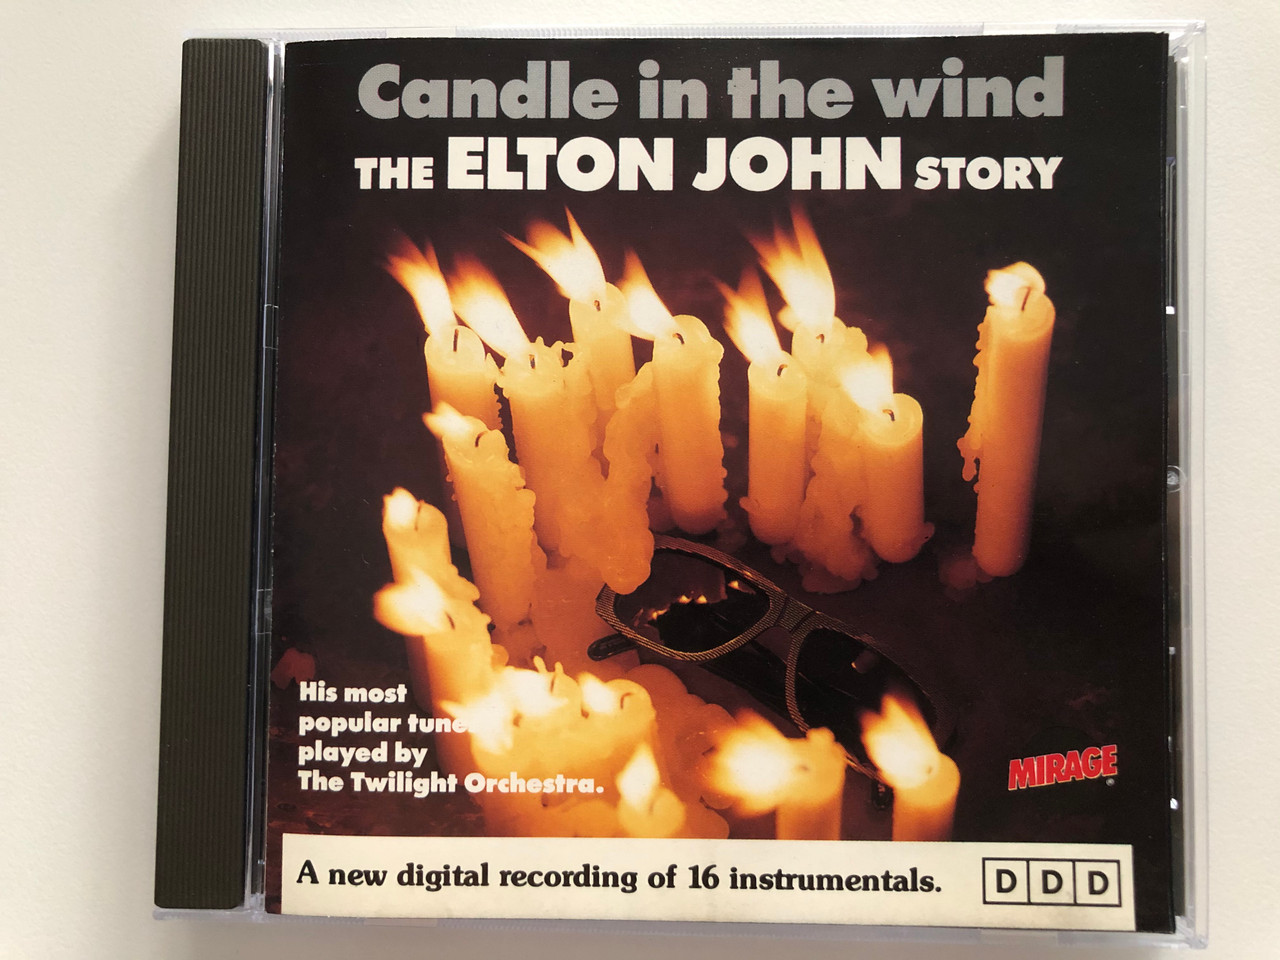 https://cdn10.bigcommerce.com/s-62bdpkt7pb/products/29322/images/174898/Candle_In_The_Wind_-_The_Elton_John_Story_His_most_popular_tunes_played_by_The_Twilight_Orchestra_A_new_digital_recording_of_16_instrumentals._Mirage_Audio_CD_91014418_1__27351.1618304273.1280.1280.JPG?c=2&_ga=2.194362606.2134474457.1618319212-1214595420.1618319212